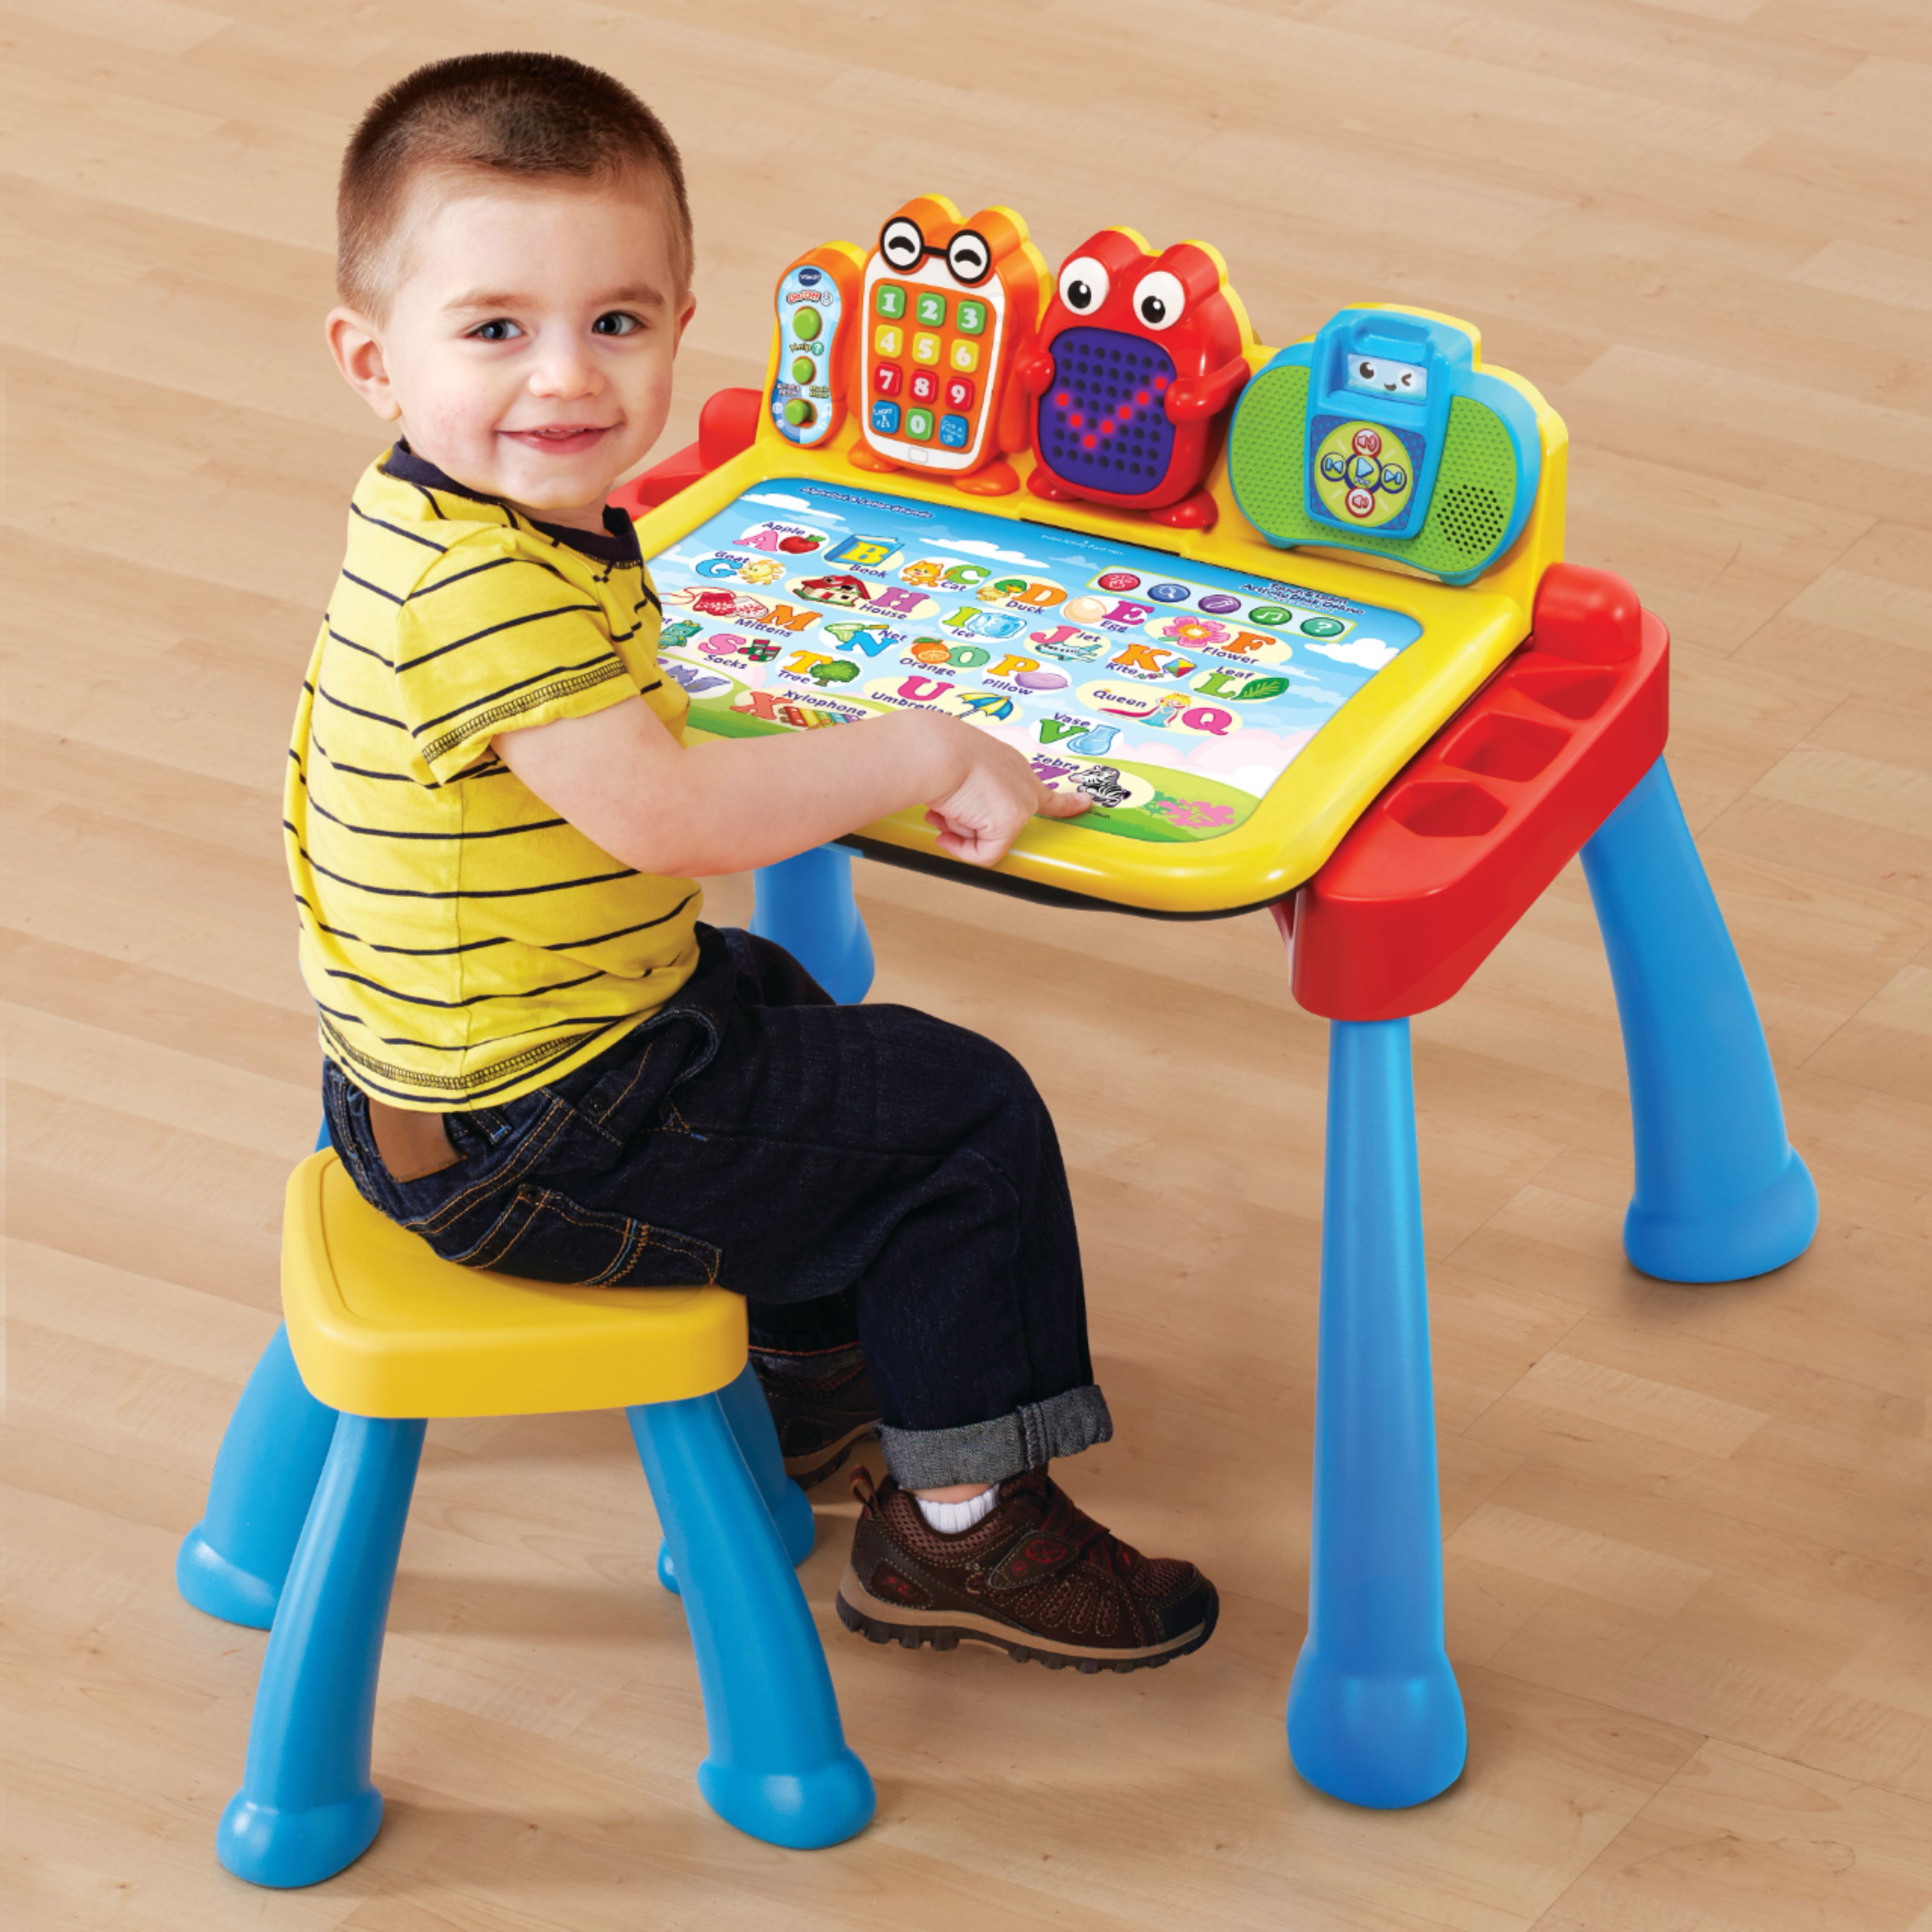 Customer Reviews: VTech Touch and Learn Activity Desk Deluxe Multi ...